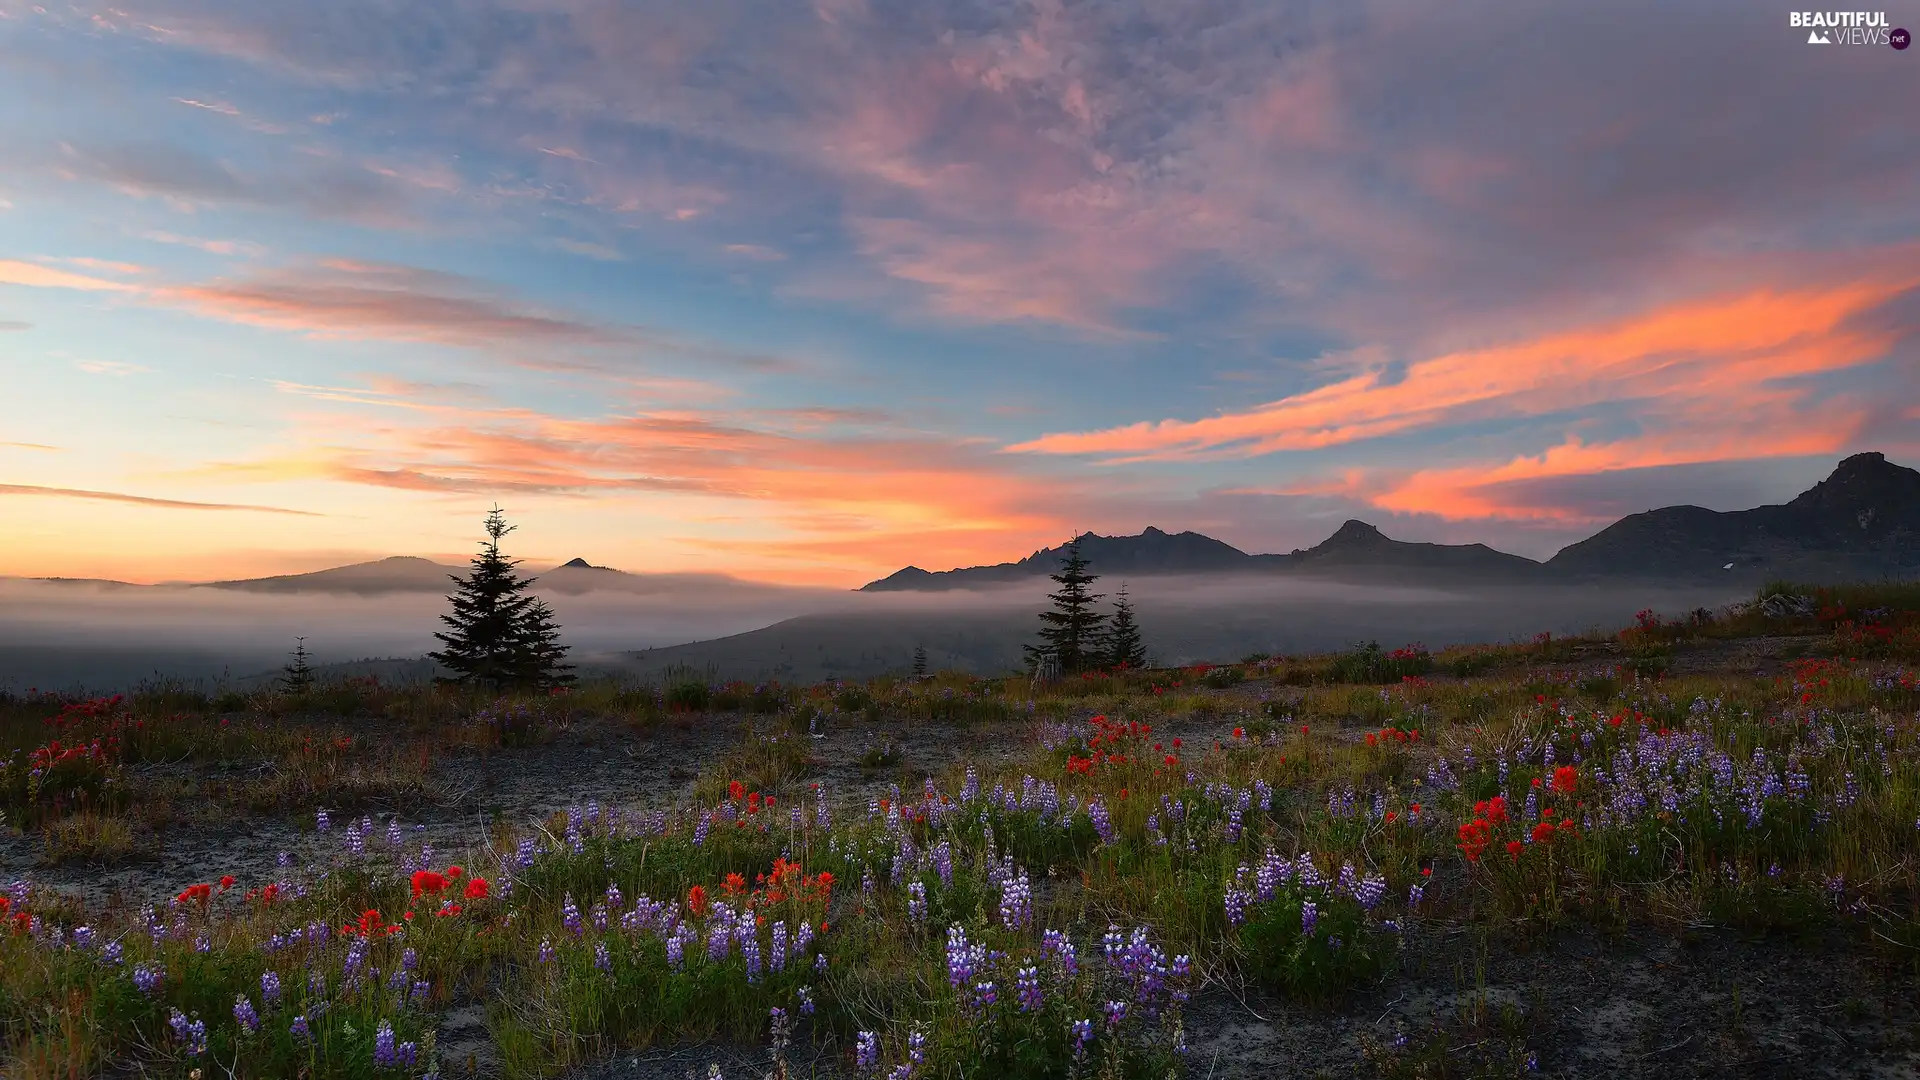 Fog, The Hills, Sunrise, clouds, Flowers, Meadow